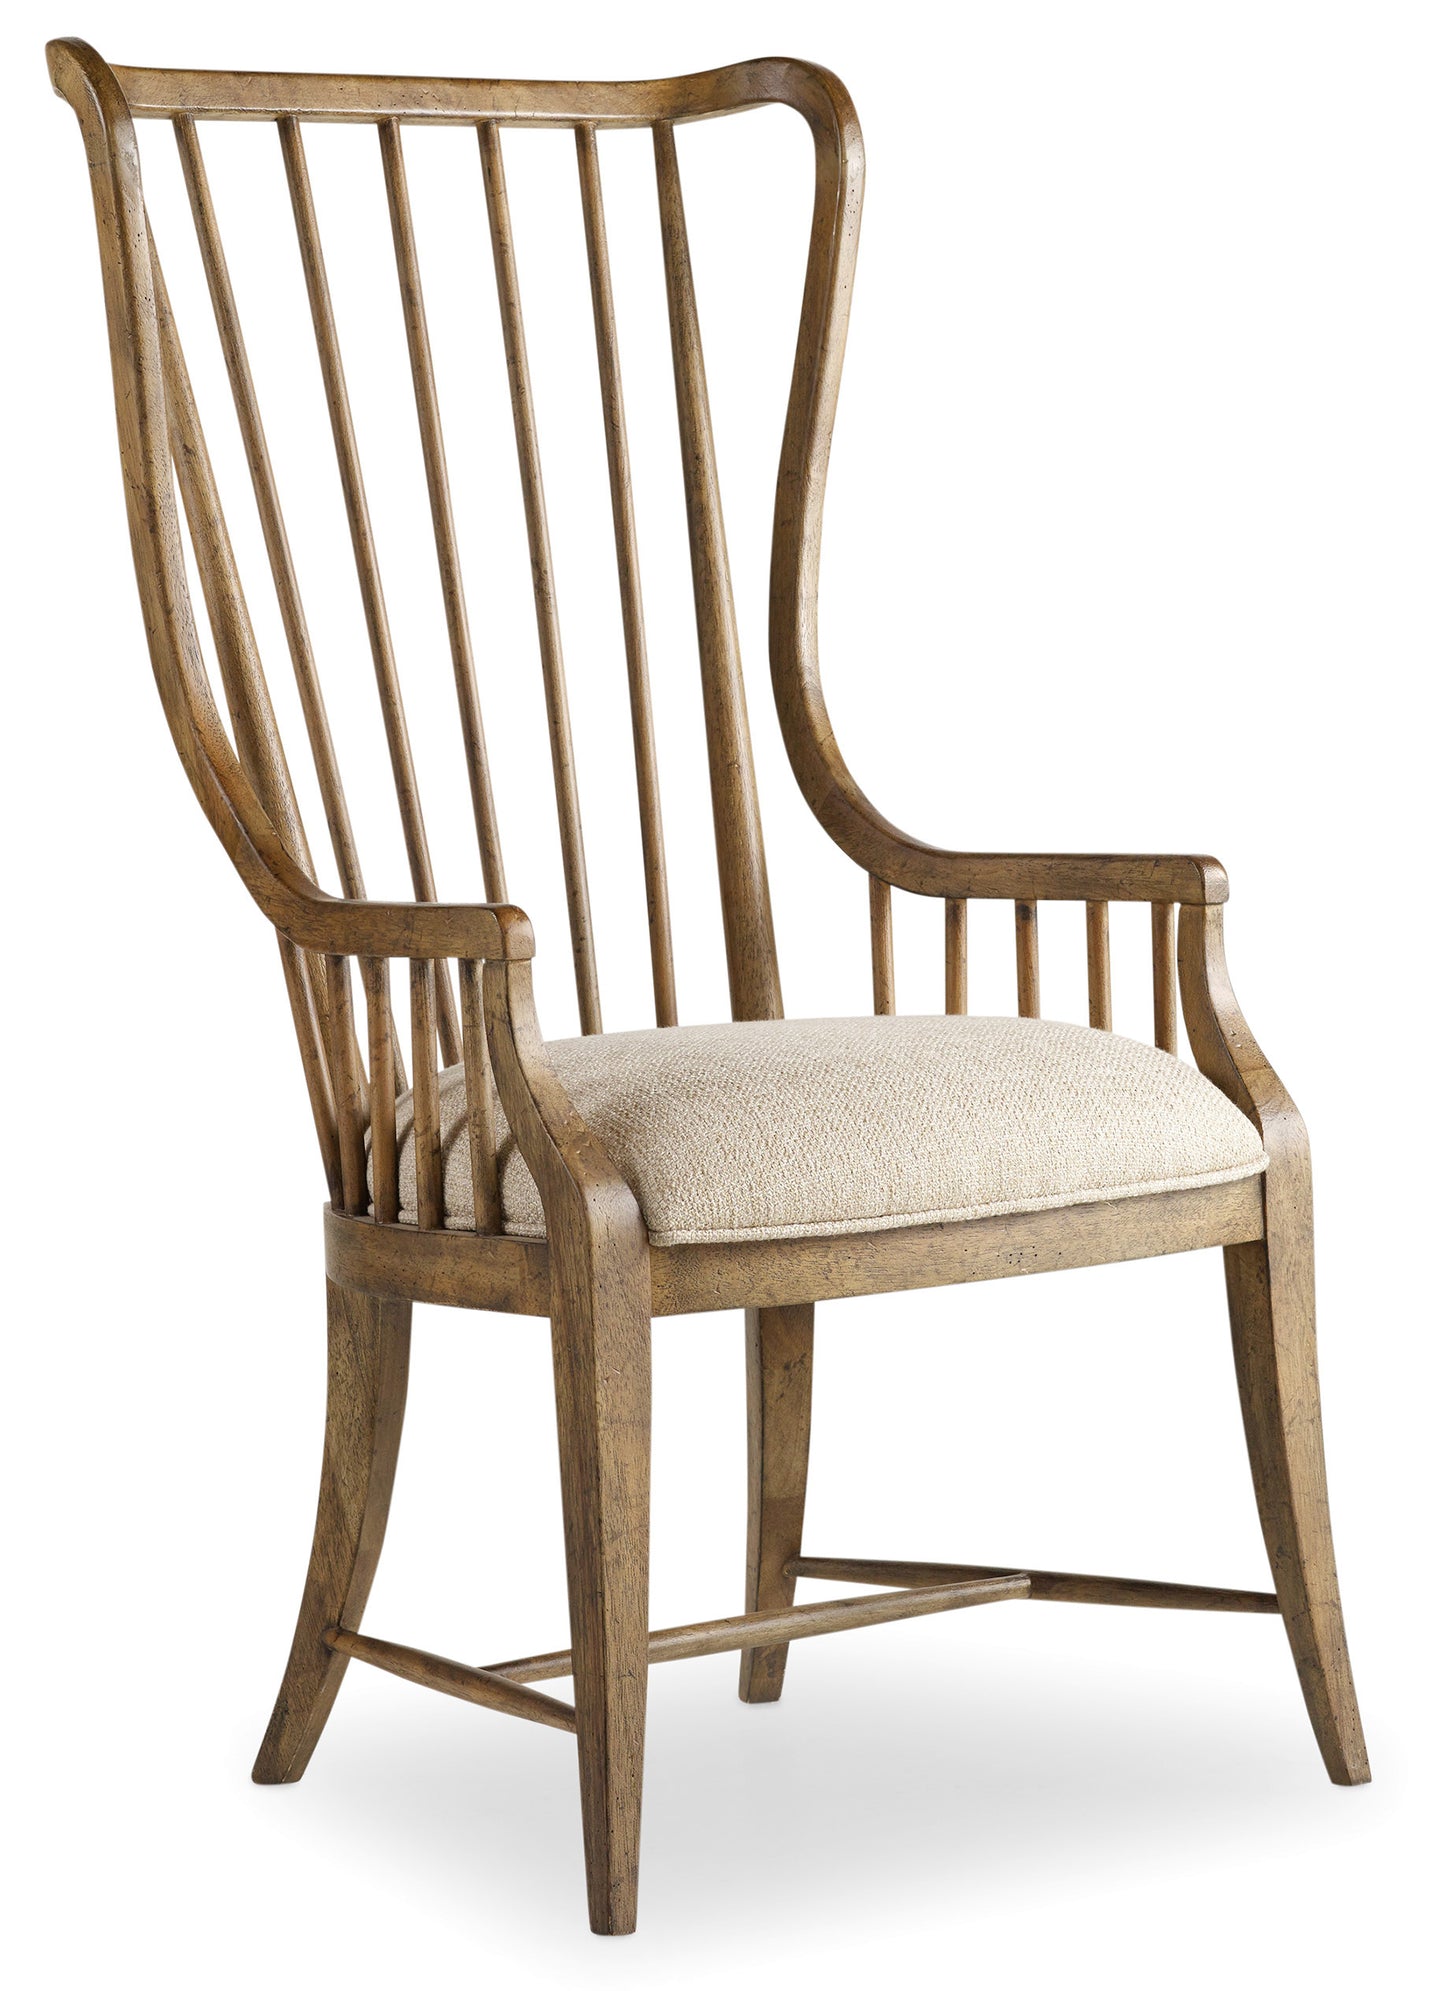 Sanctuary Tall Spindle Arm Chair - 2 per carton/price ea